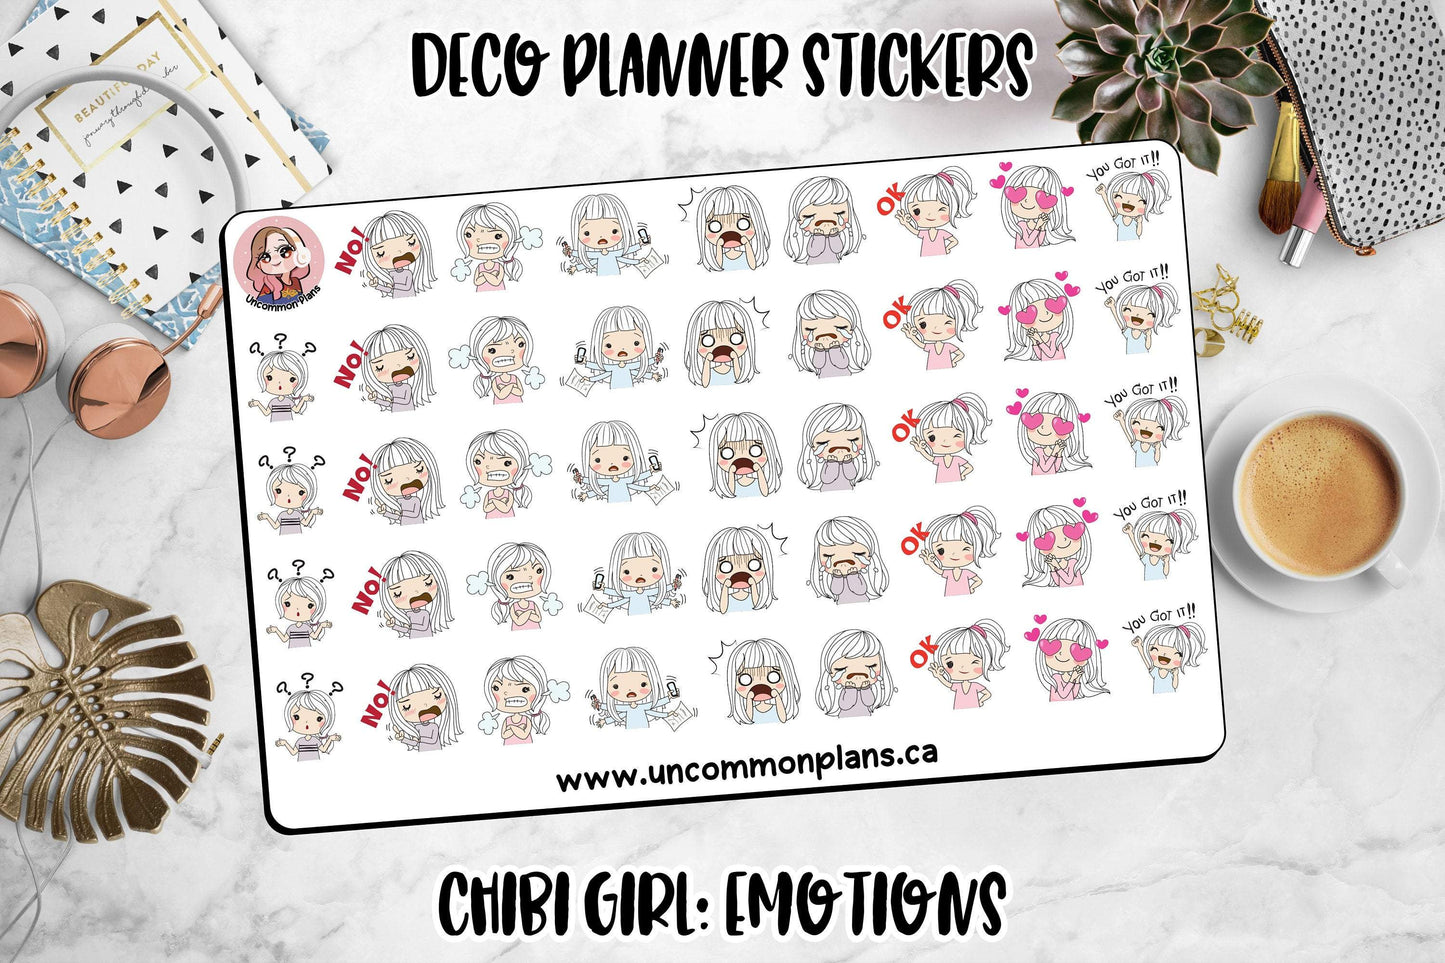 Doodle Girl Emotions Deco Planner Stickers Sheet